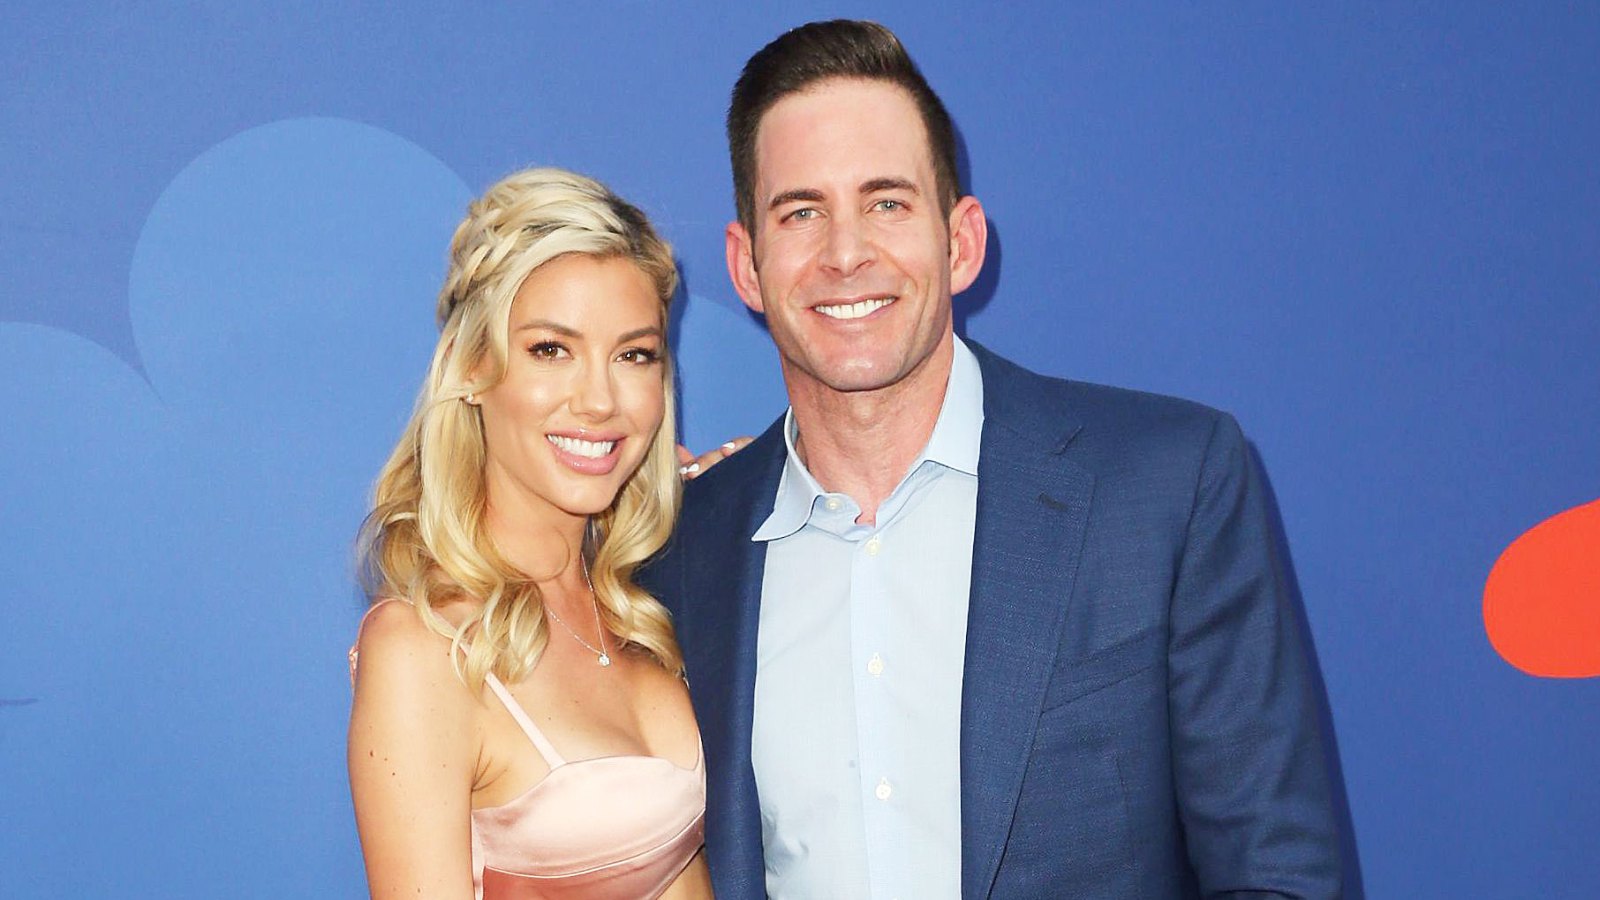 Tarek El Moussa and Heather Rae Young Share Their Holiday Plans